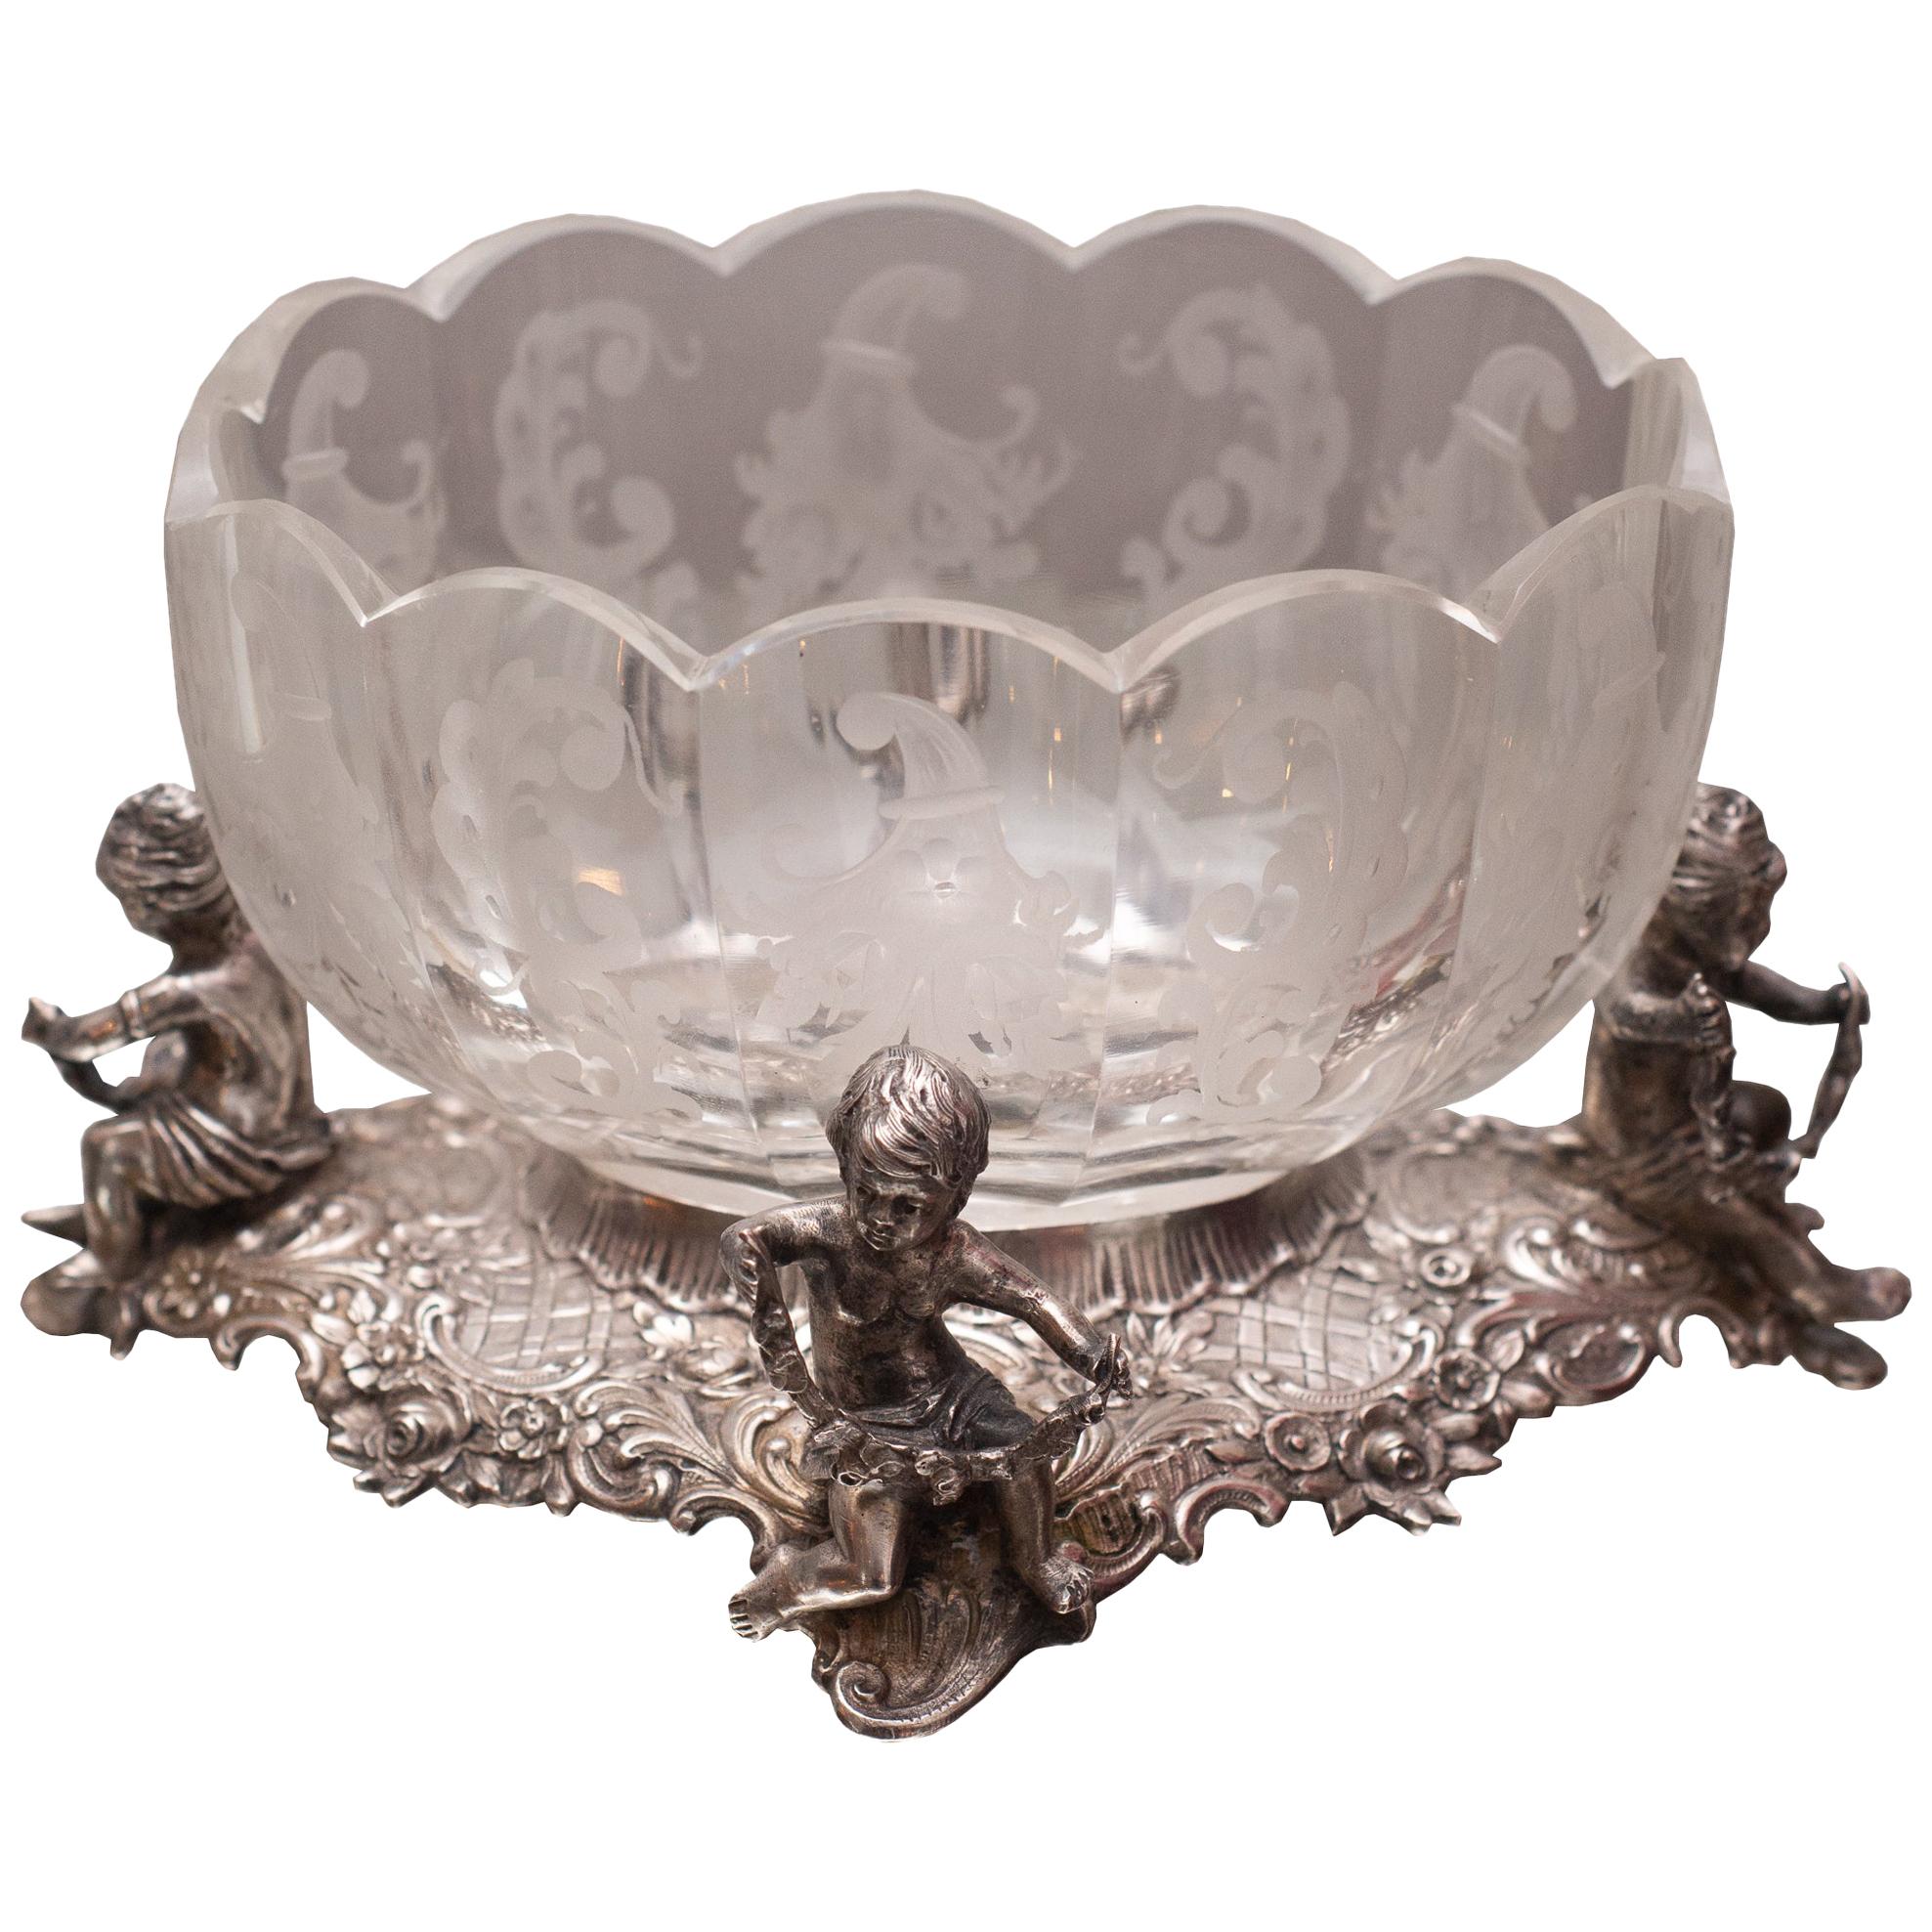 Antique Etched Glass Bowl on a 800 German Silver Bases with Cherubs